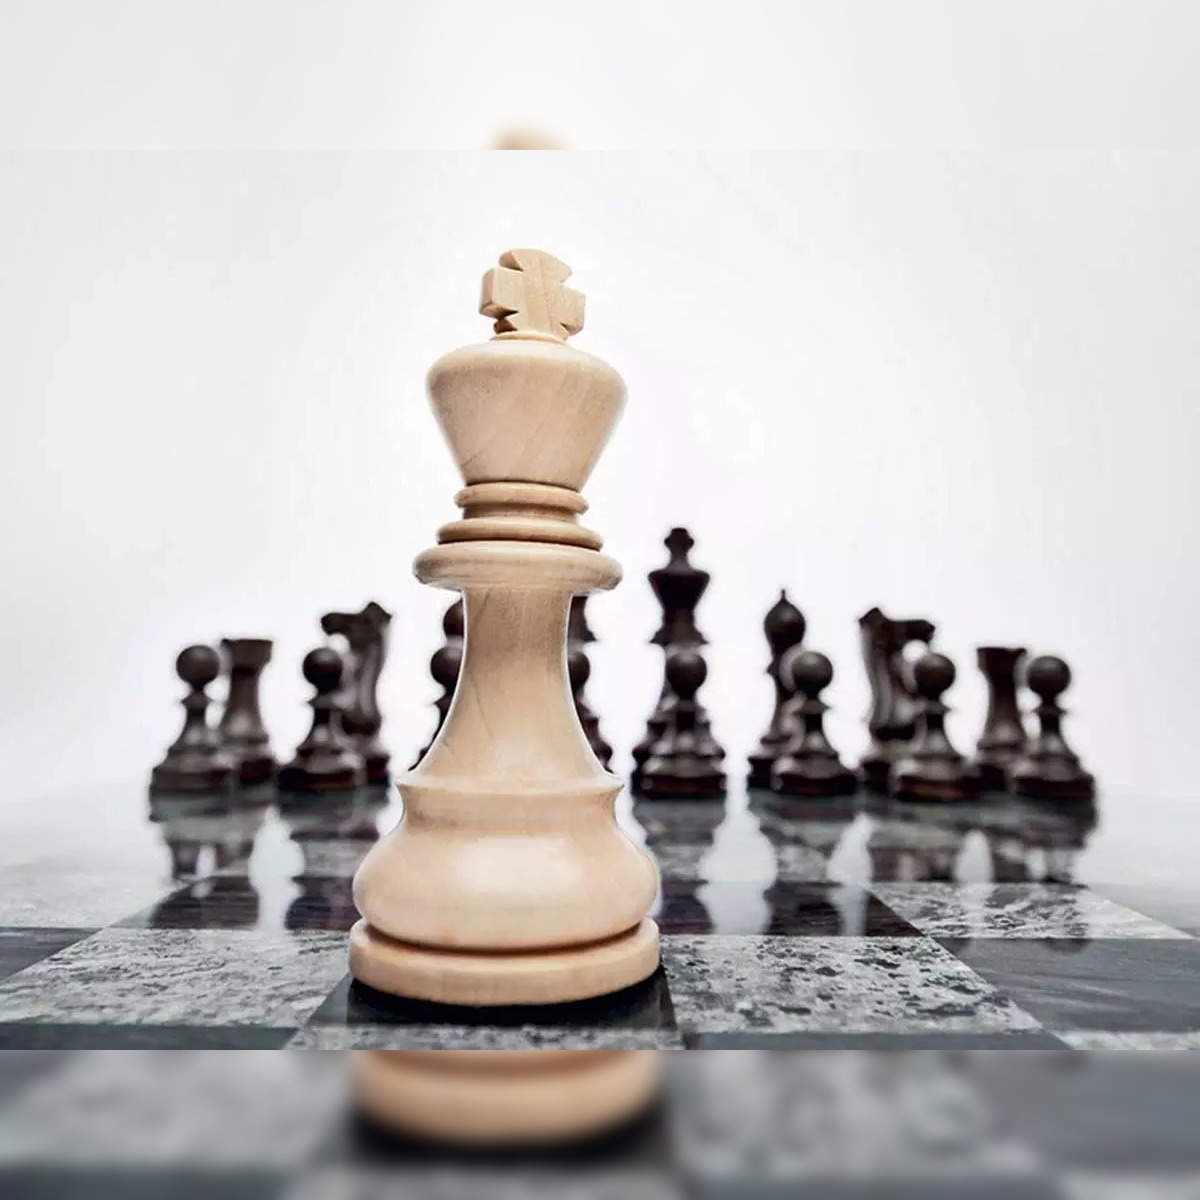 Read all Latest Updates on and about Chess Olympiad